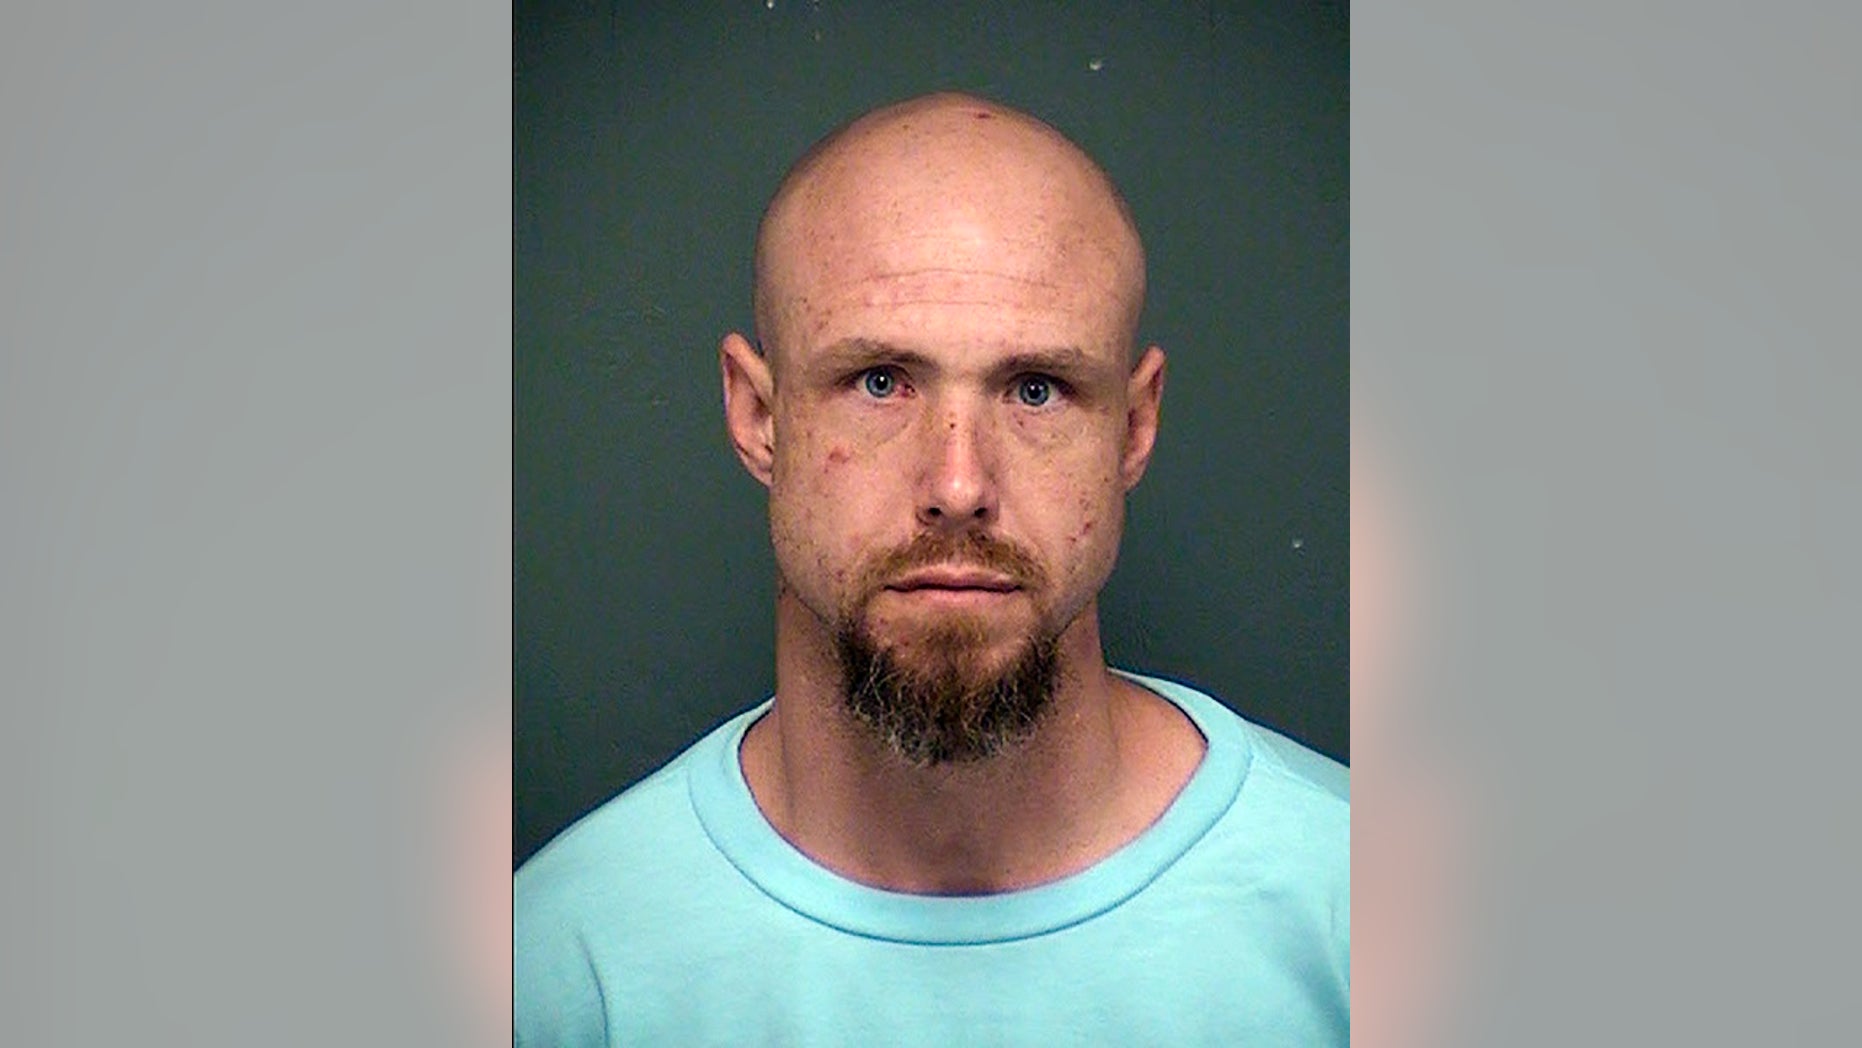 David James Bohart has been charged with second degree murder in Pima County Prison, authorities said.